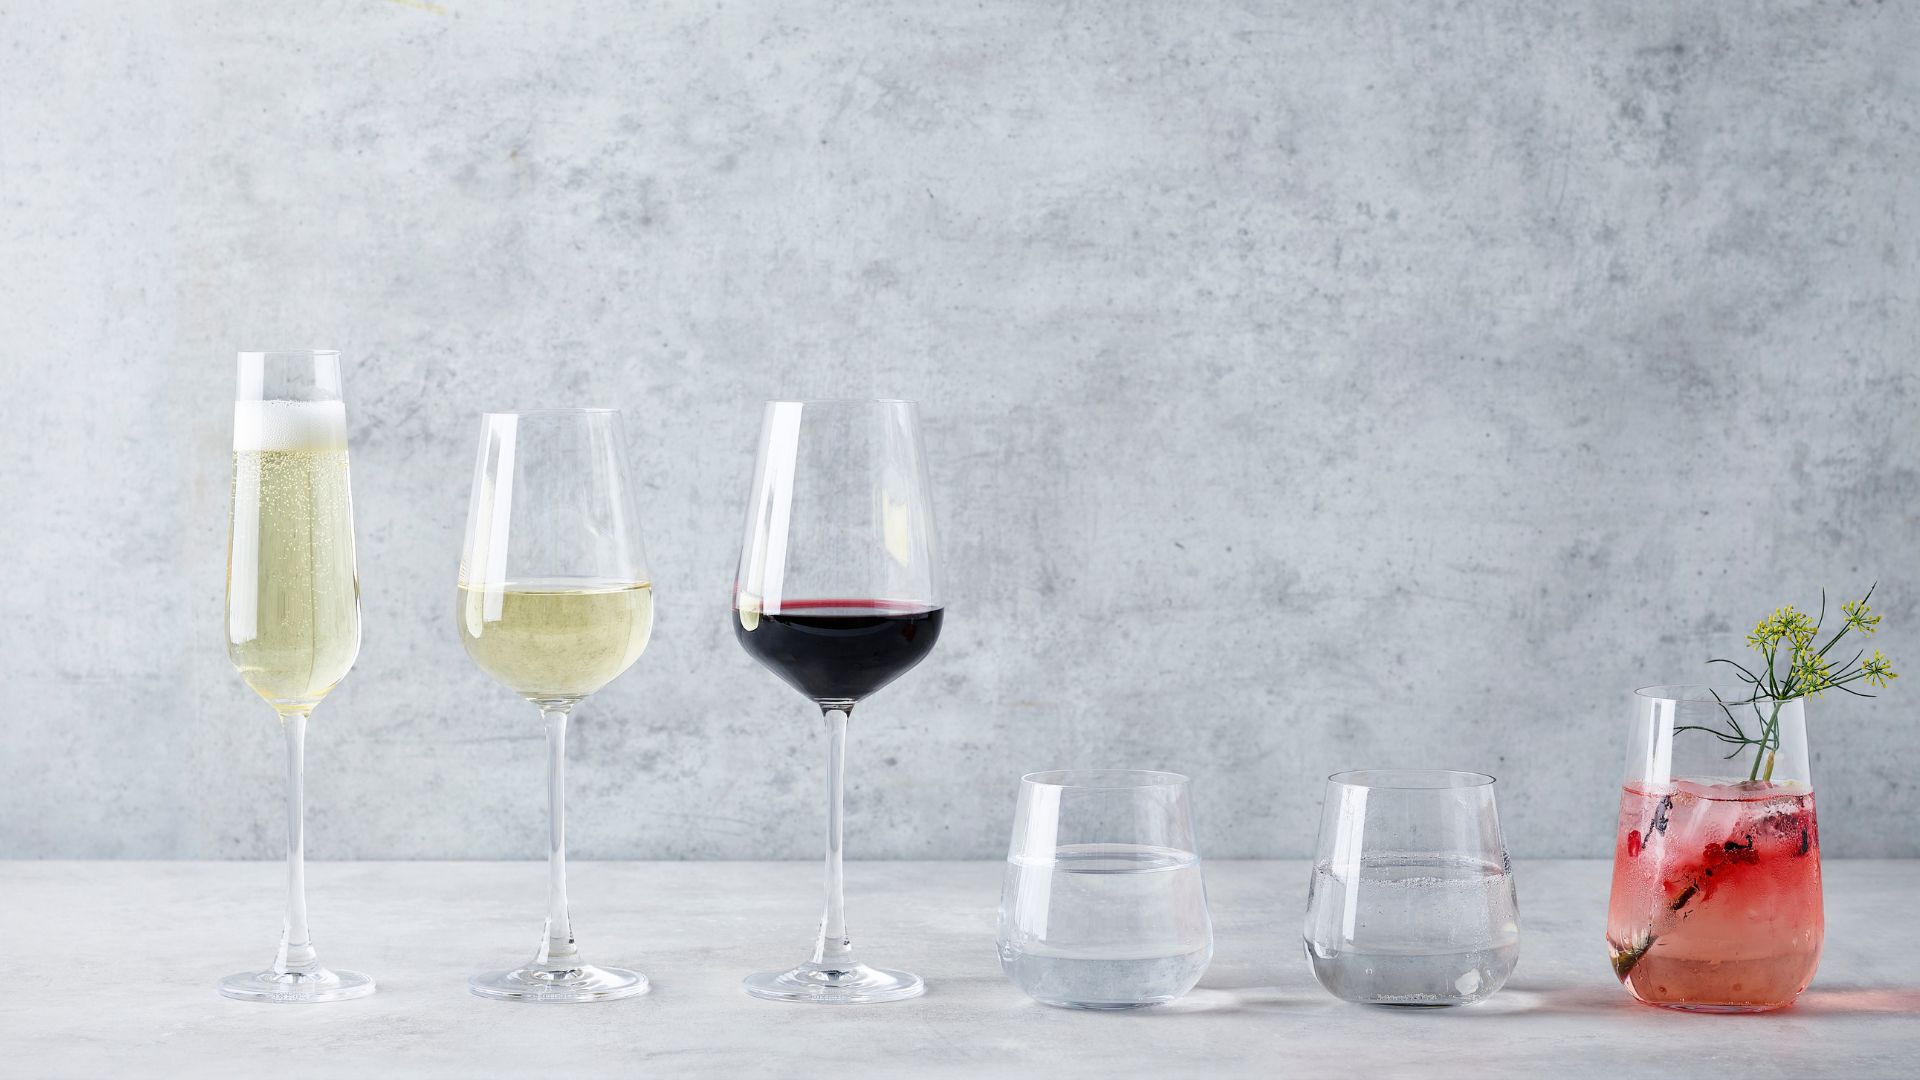 Cheers To Perfection: A Definitive Guide To The Best Drinking Glasses